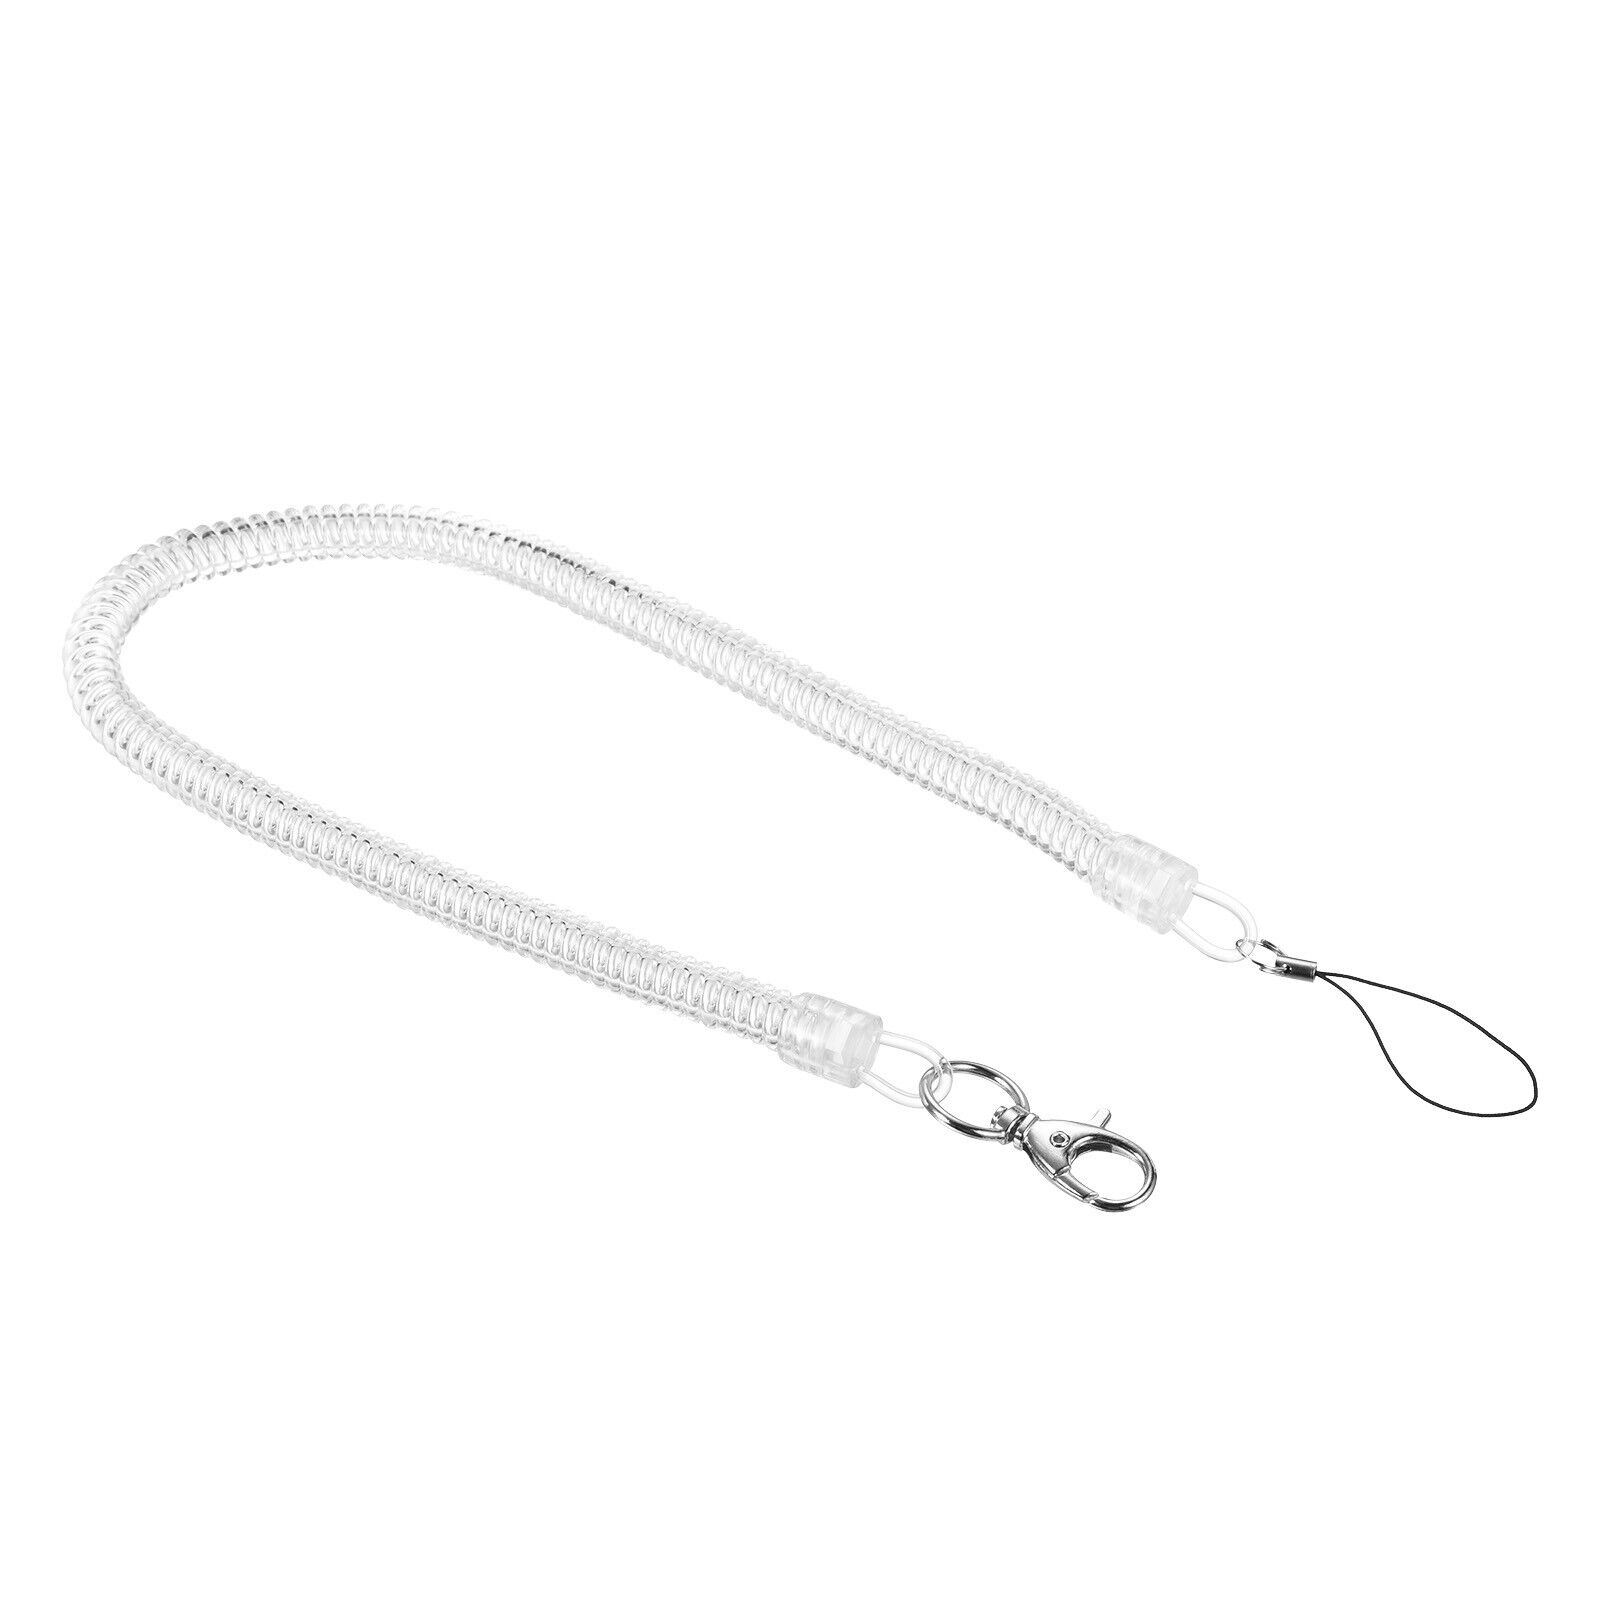 Retractable Coil Spring Keychain with Key Ring 460mm, 1 Pack Plastic Clear